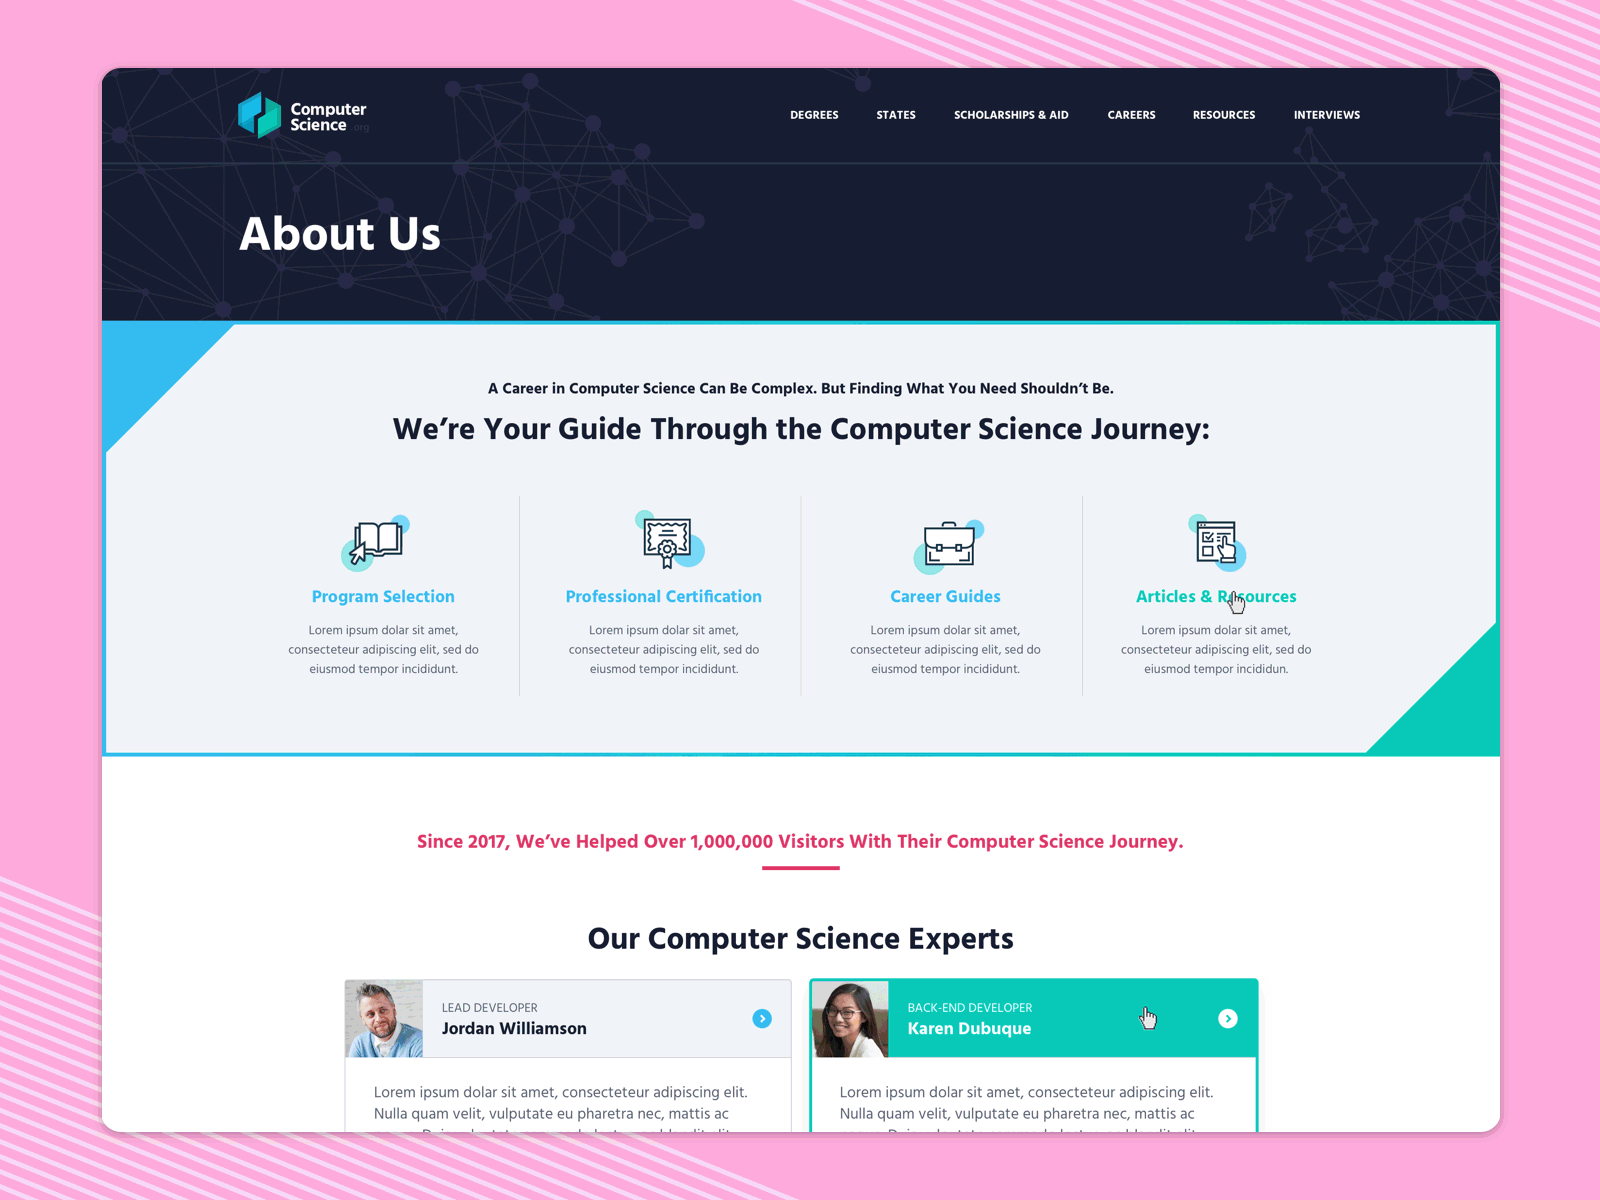 ComputerScience.org | About Us Page